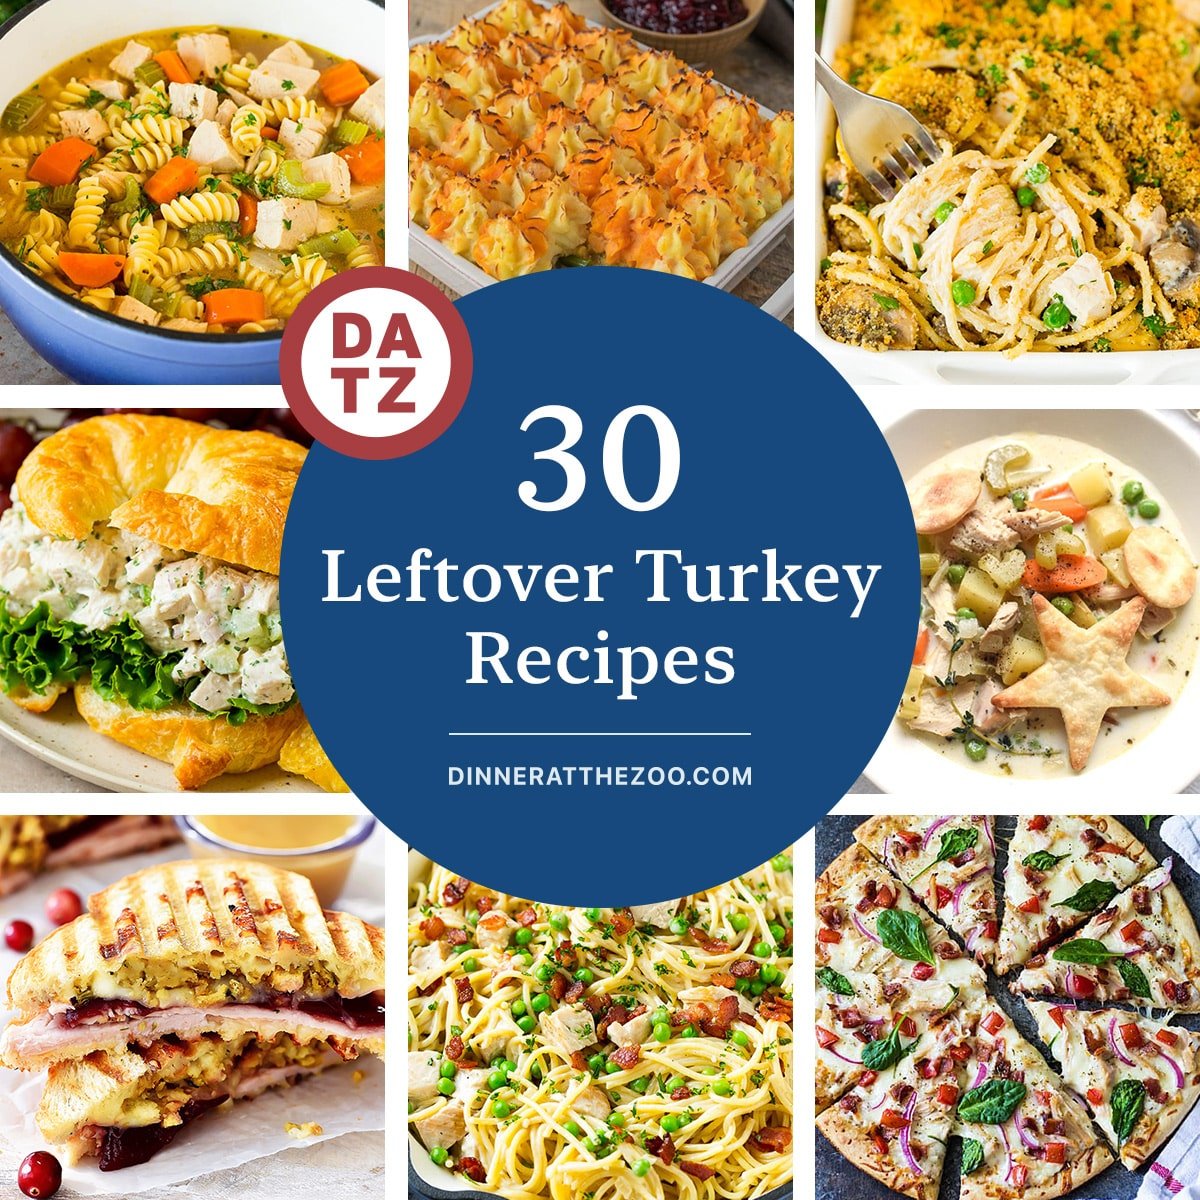 A collage of images of leftover turkey recipes like turkey salad, turkey noodle soup and turkey bacon ranch pizza.